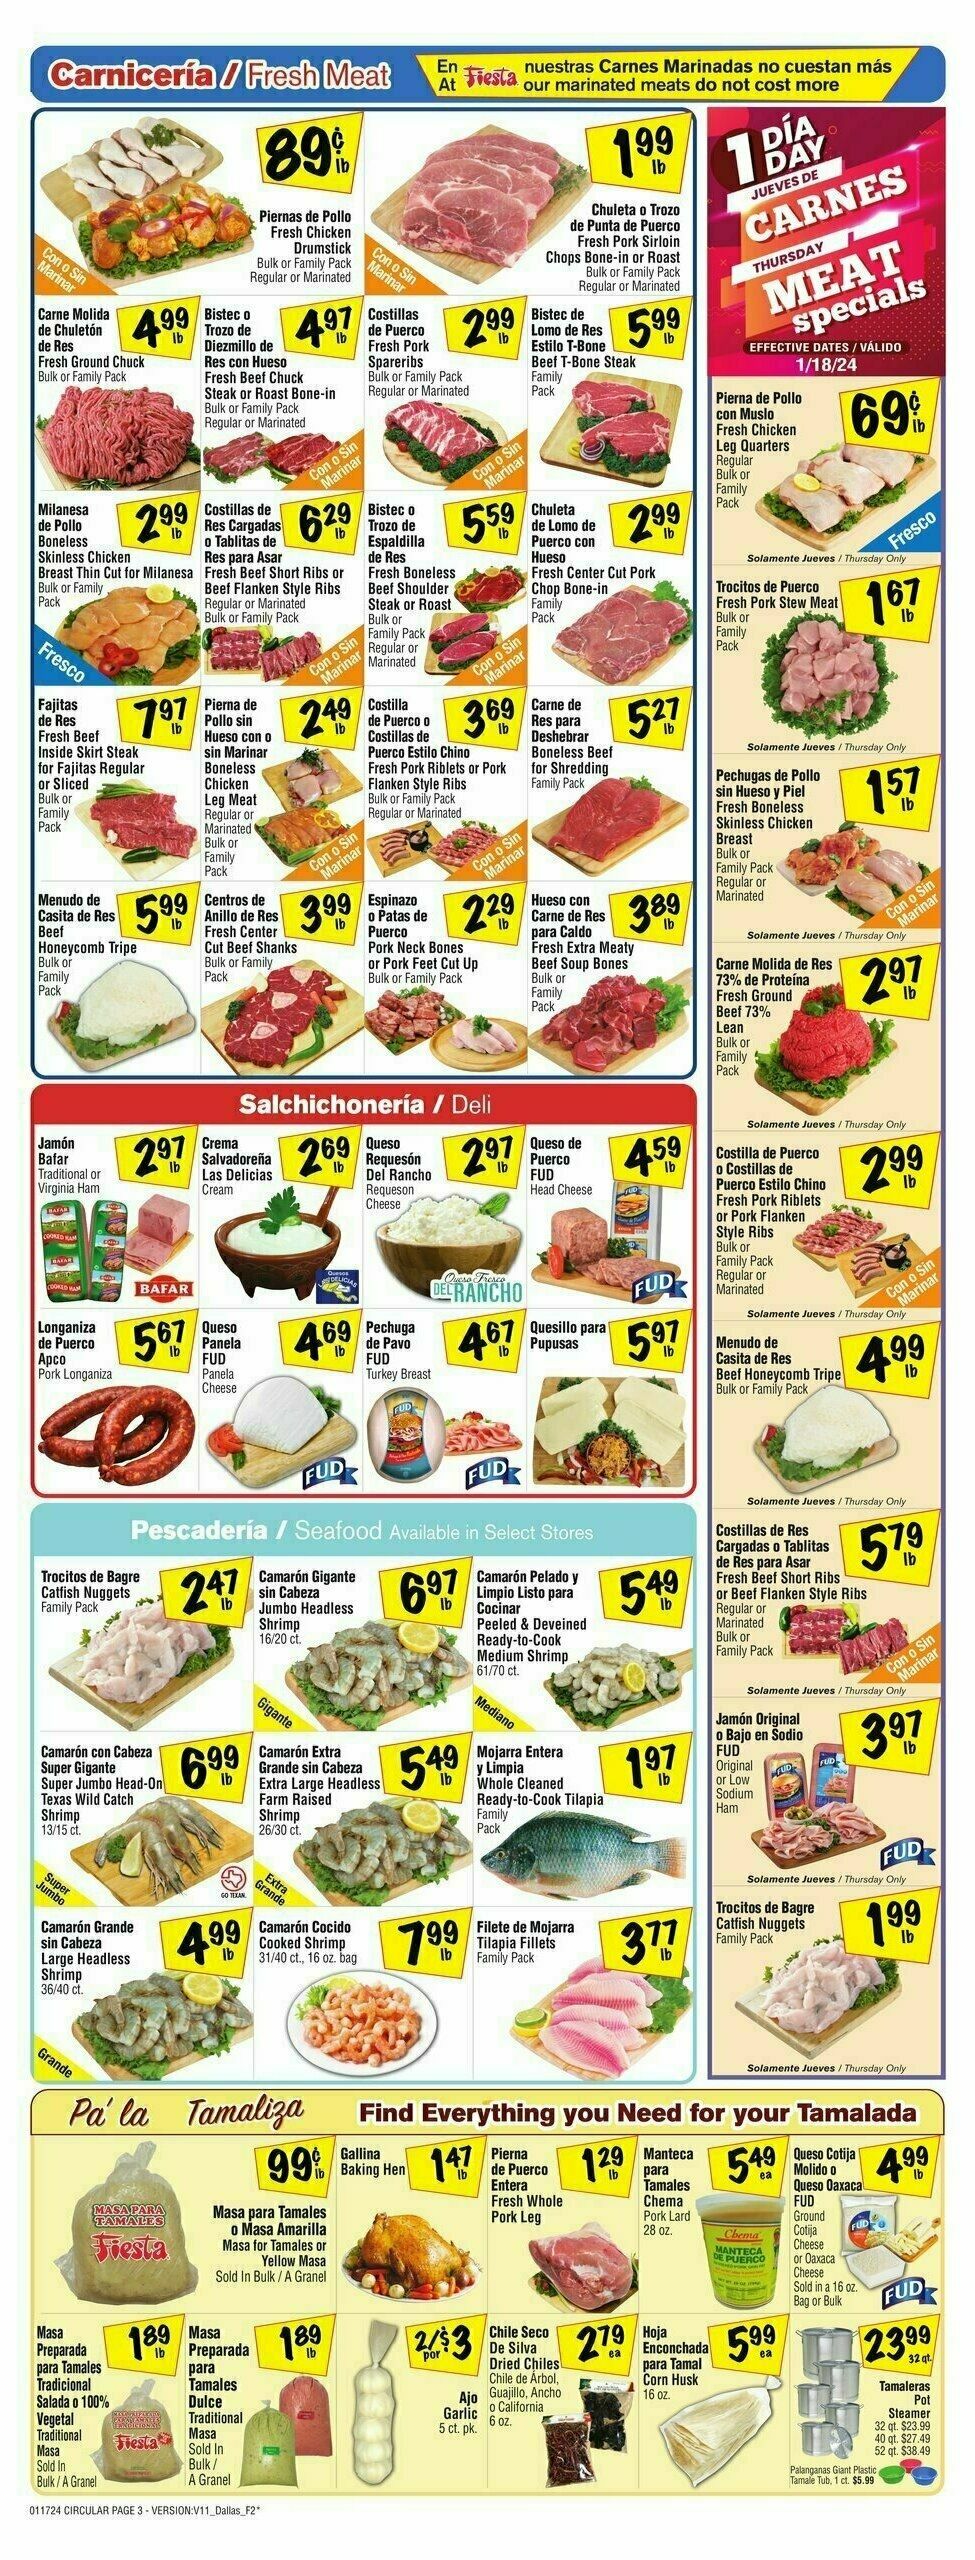 Fiesta Mart Weekly Ad from January 17